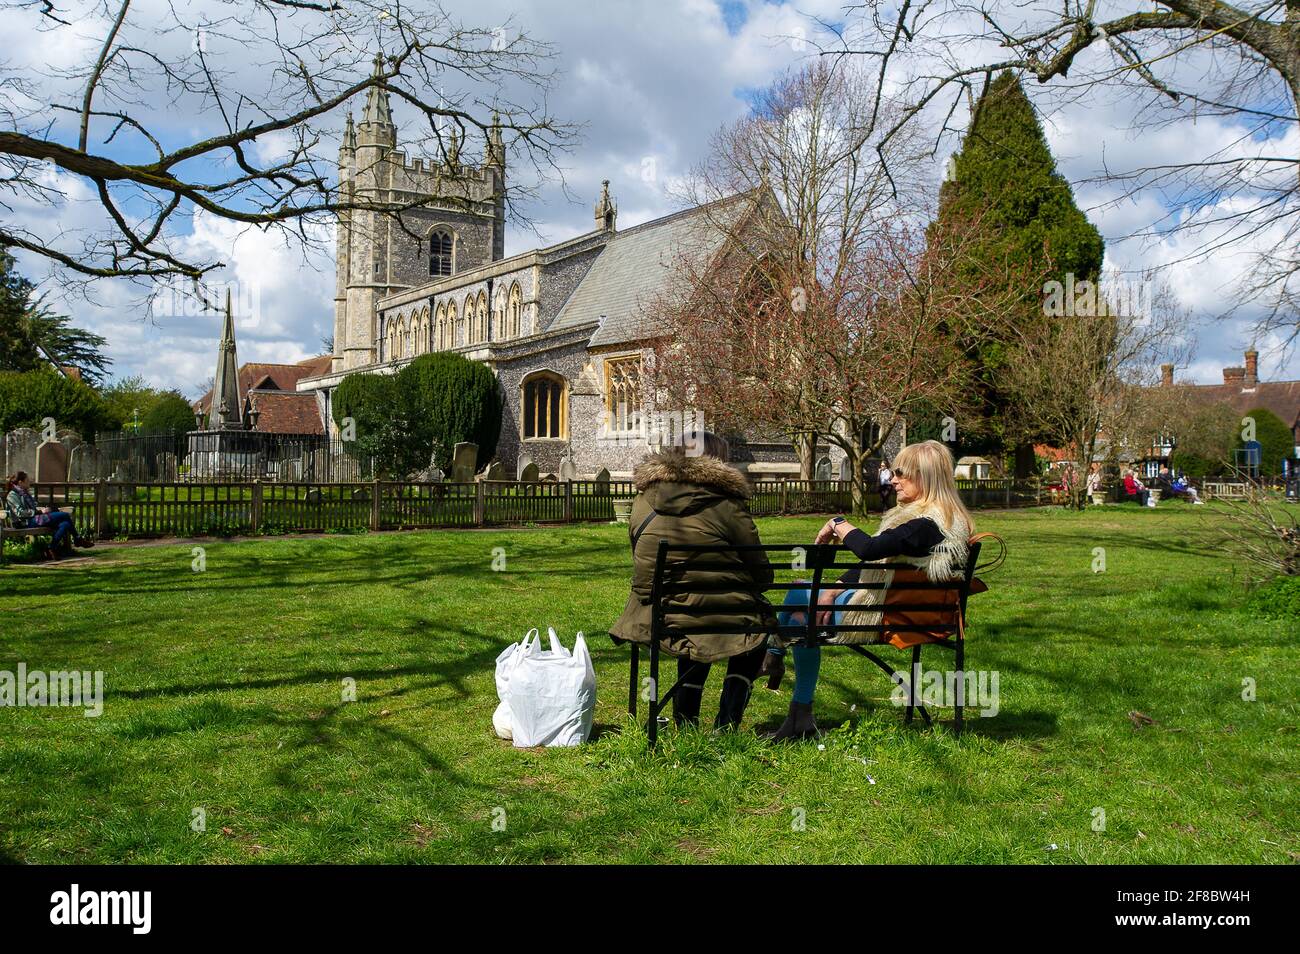 Beaconsifield, Buckinghamshire, UK. 13th April, 2021. Shoppers enjoy the  morning sunshine. Beaconsfield was getting busier today as people were out  and about enjoying the Spring sunshine and the next step in the